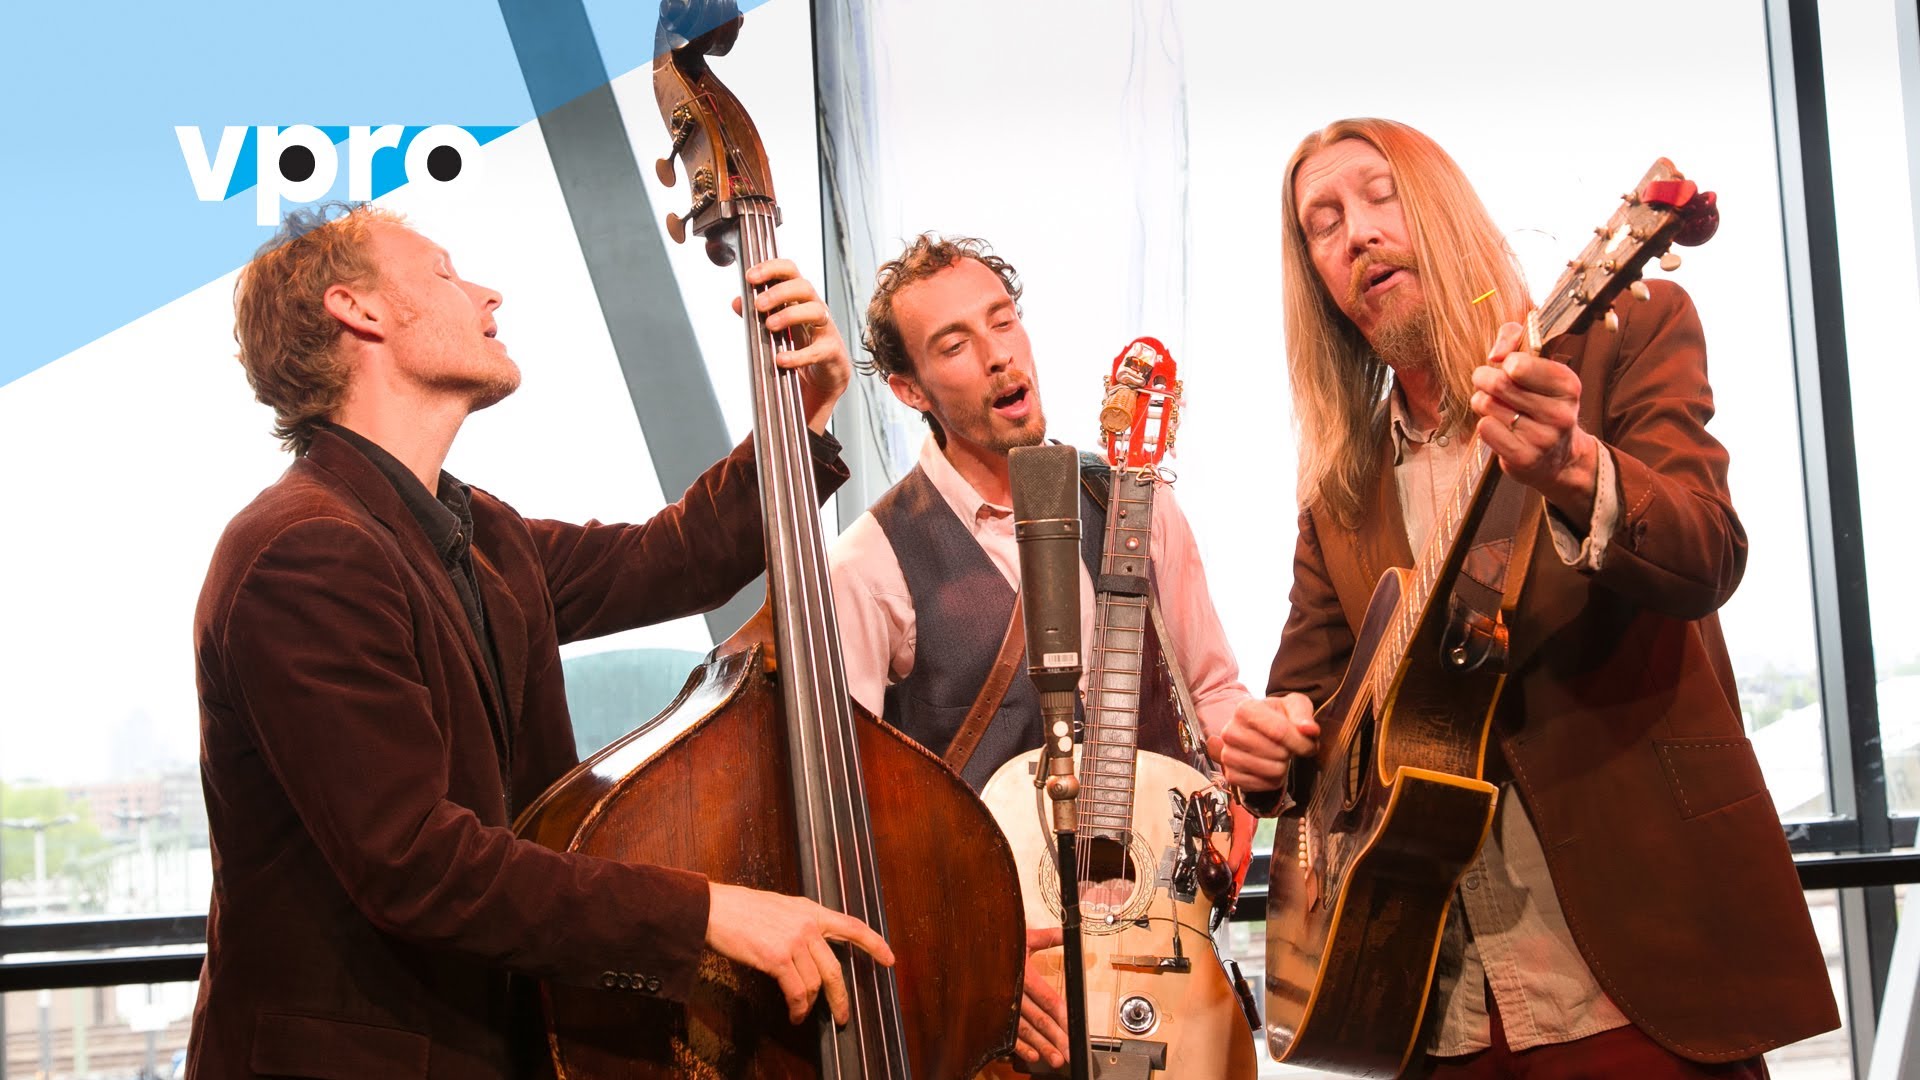 The Wood Brothers - Sing About It (Live @Bimhuis Amsterdam) - YouTube